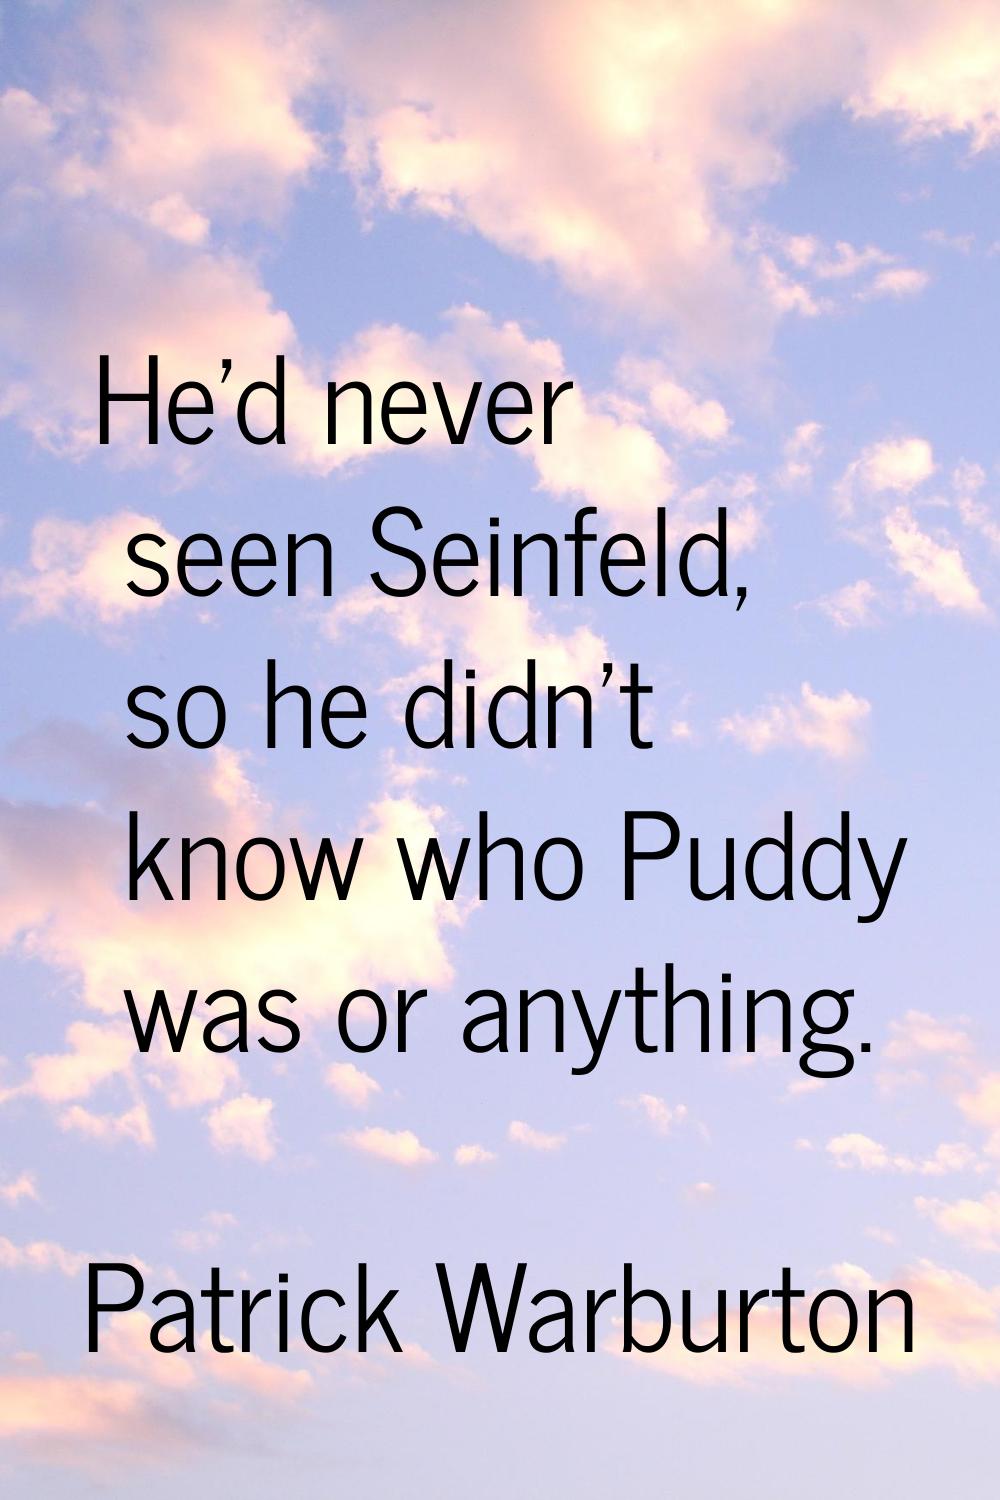 He'd never seen Seinfeld, so he didn't know who Puddy was or anything.